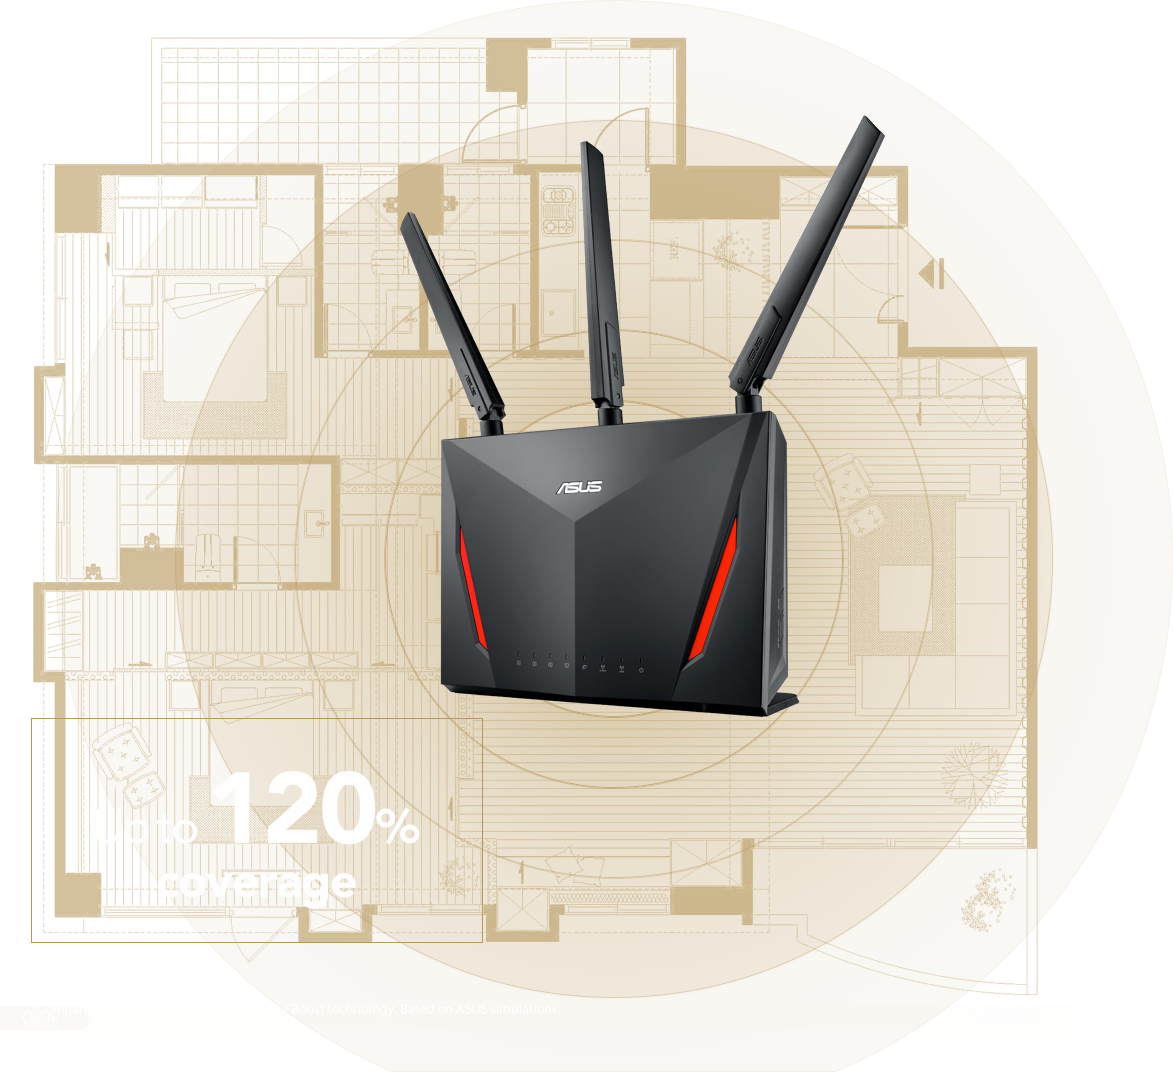 ASUS RT-AC86U router features RangeBoost increasing up to 120% Wi-Fi signal coverage.